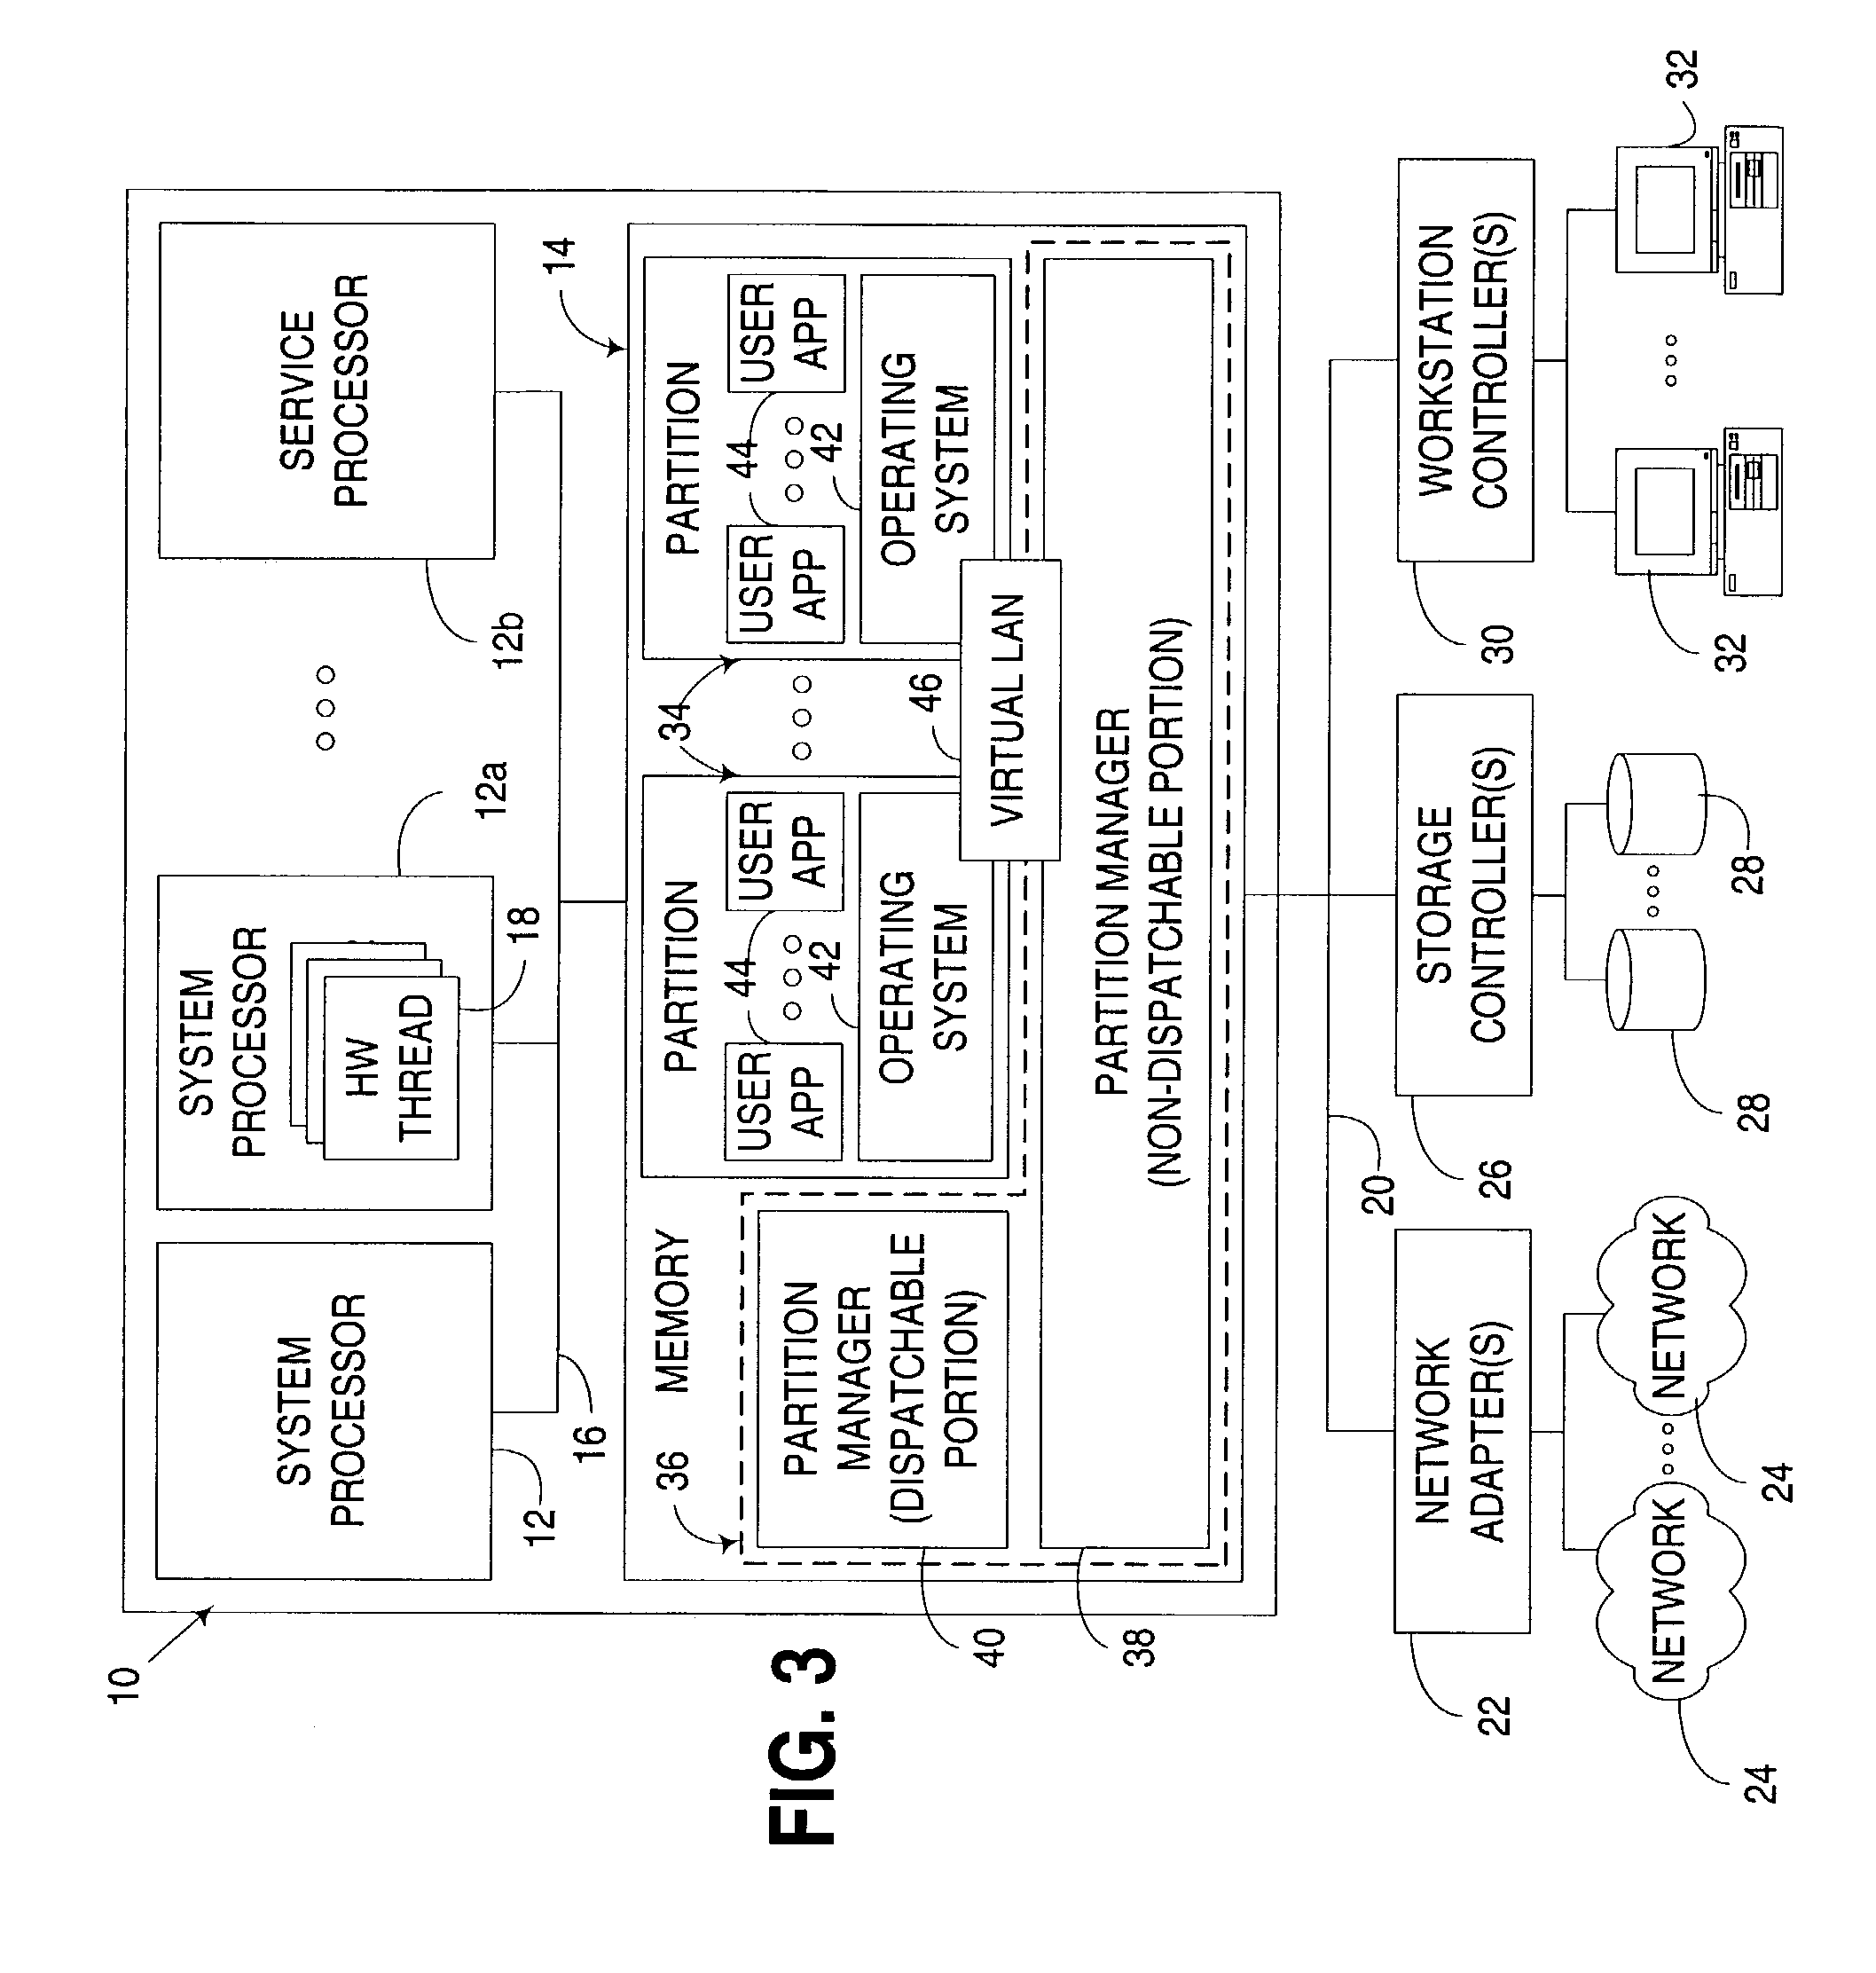 Concurrent access of shared resources utilizing tracking of request reception and completion order